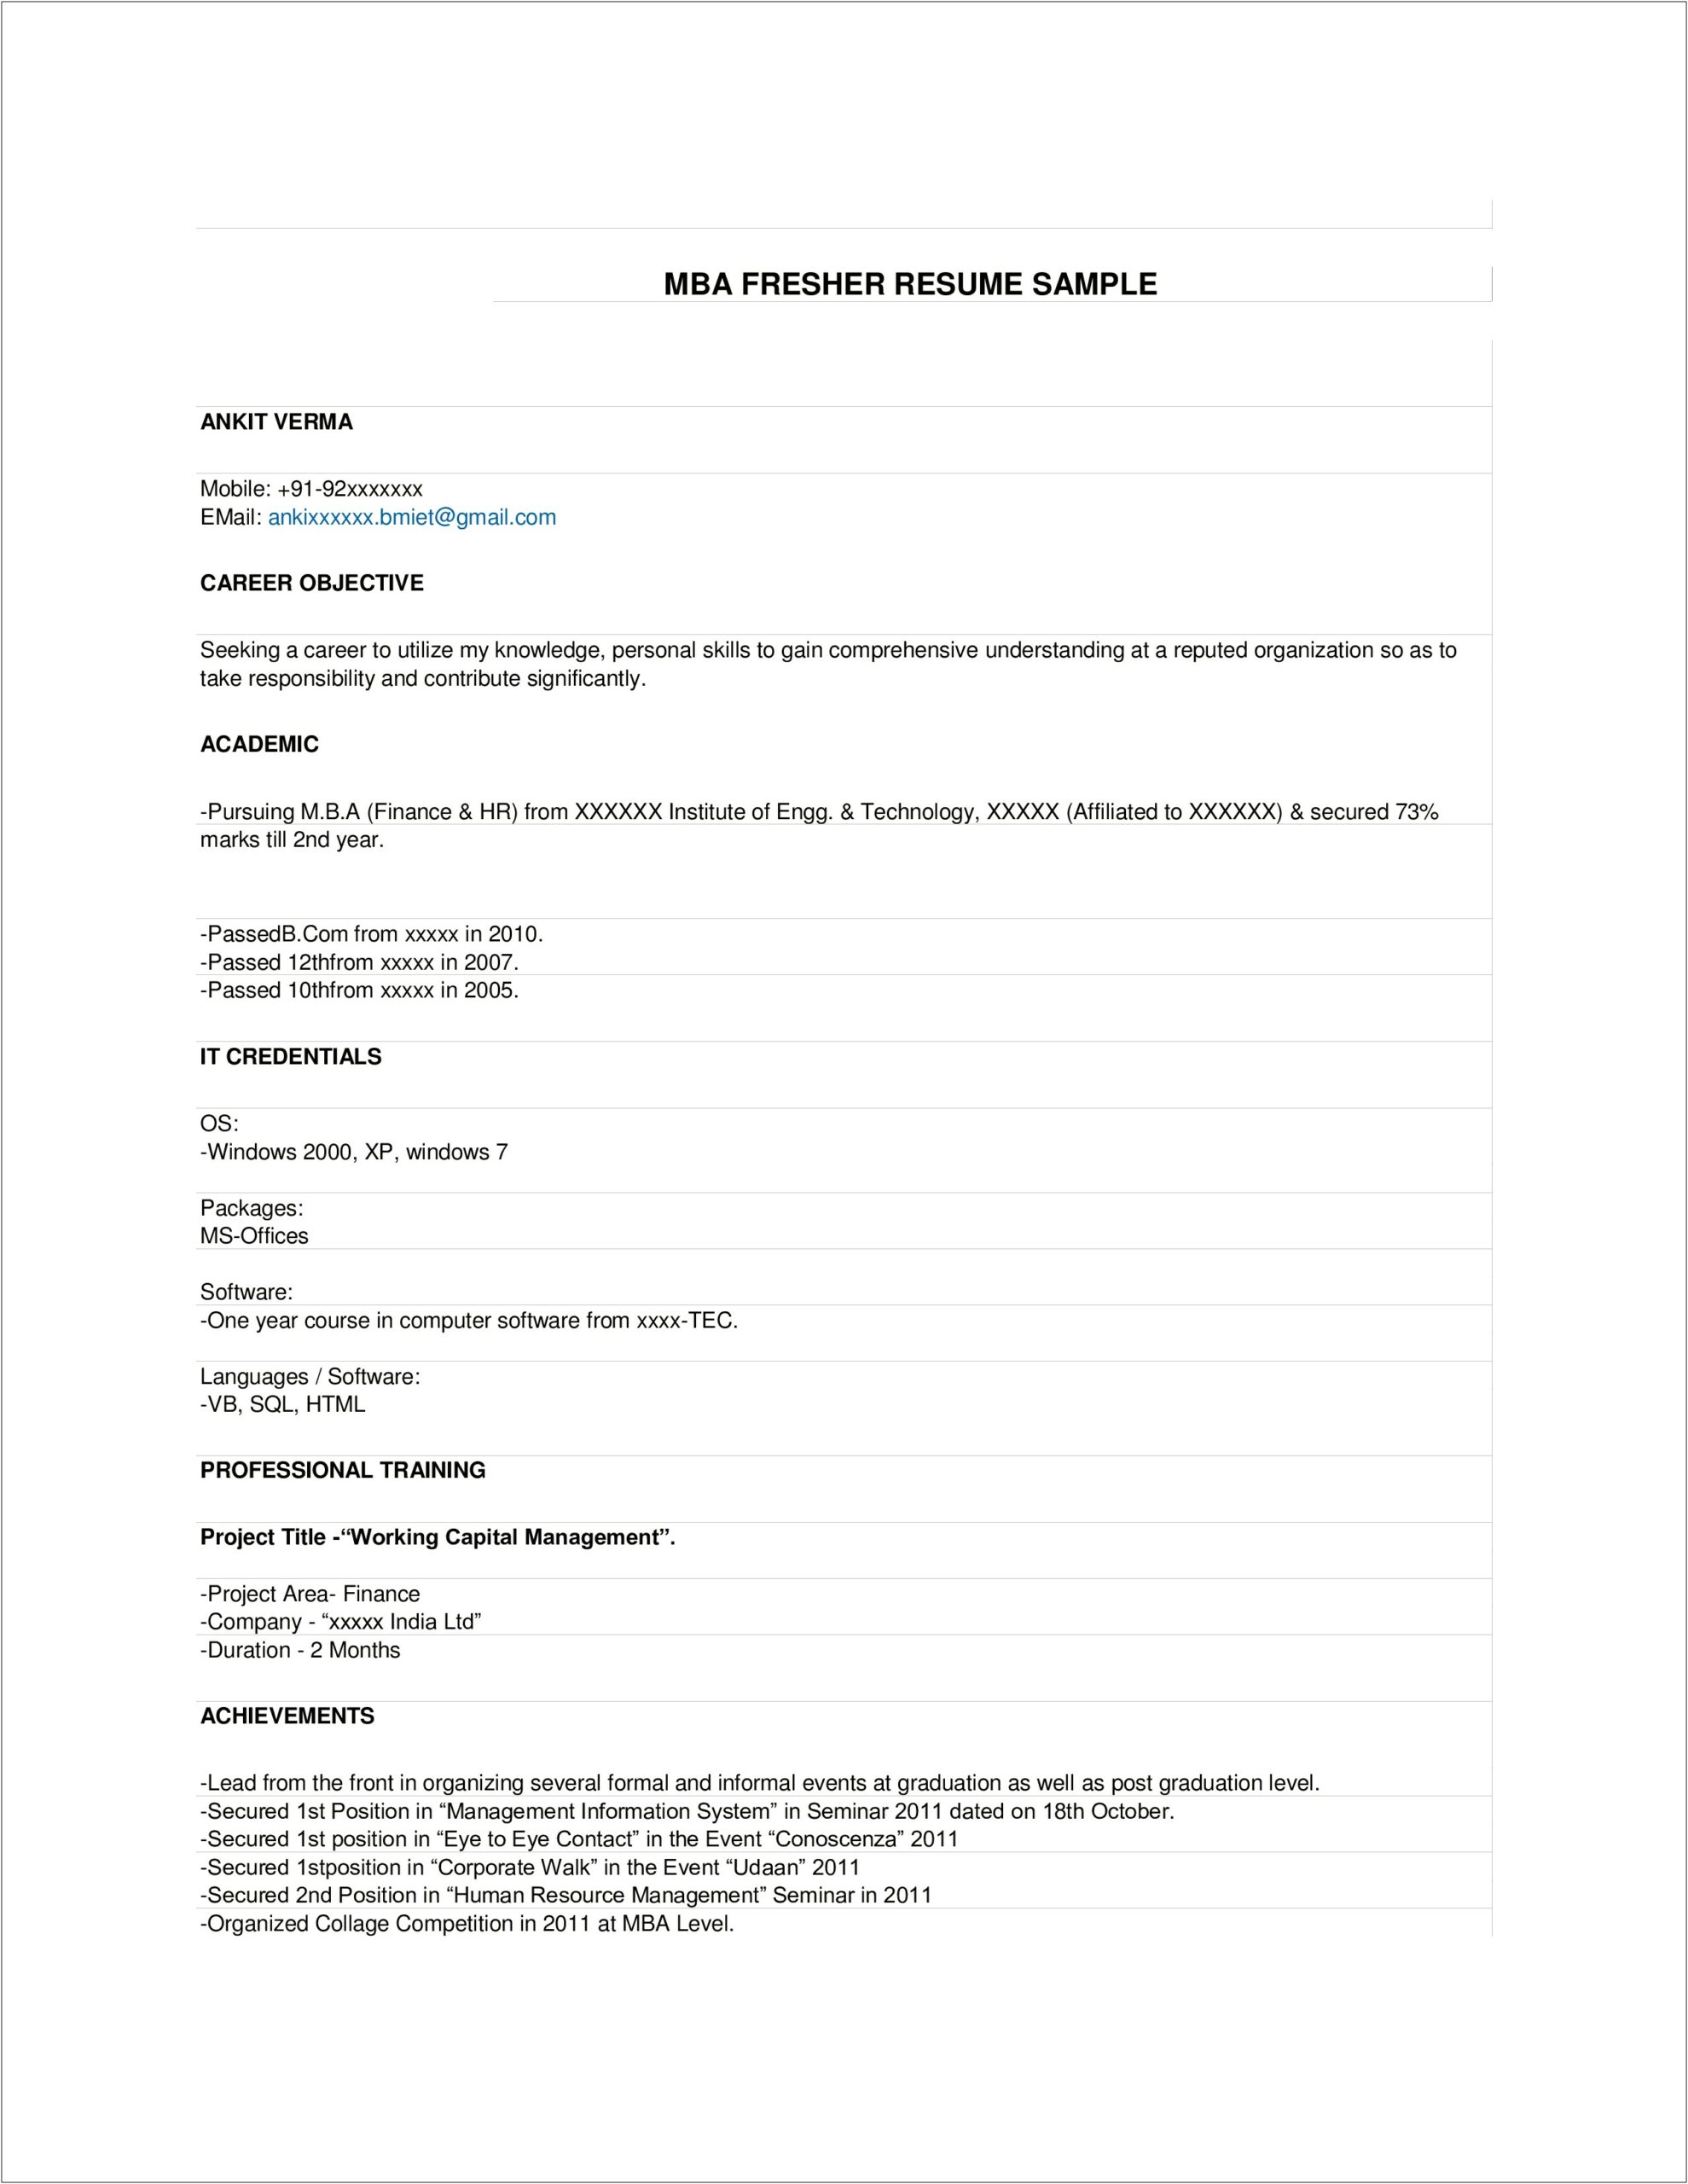 Resume Format For Freshers Mba Finance Free Download